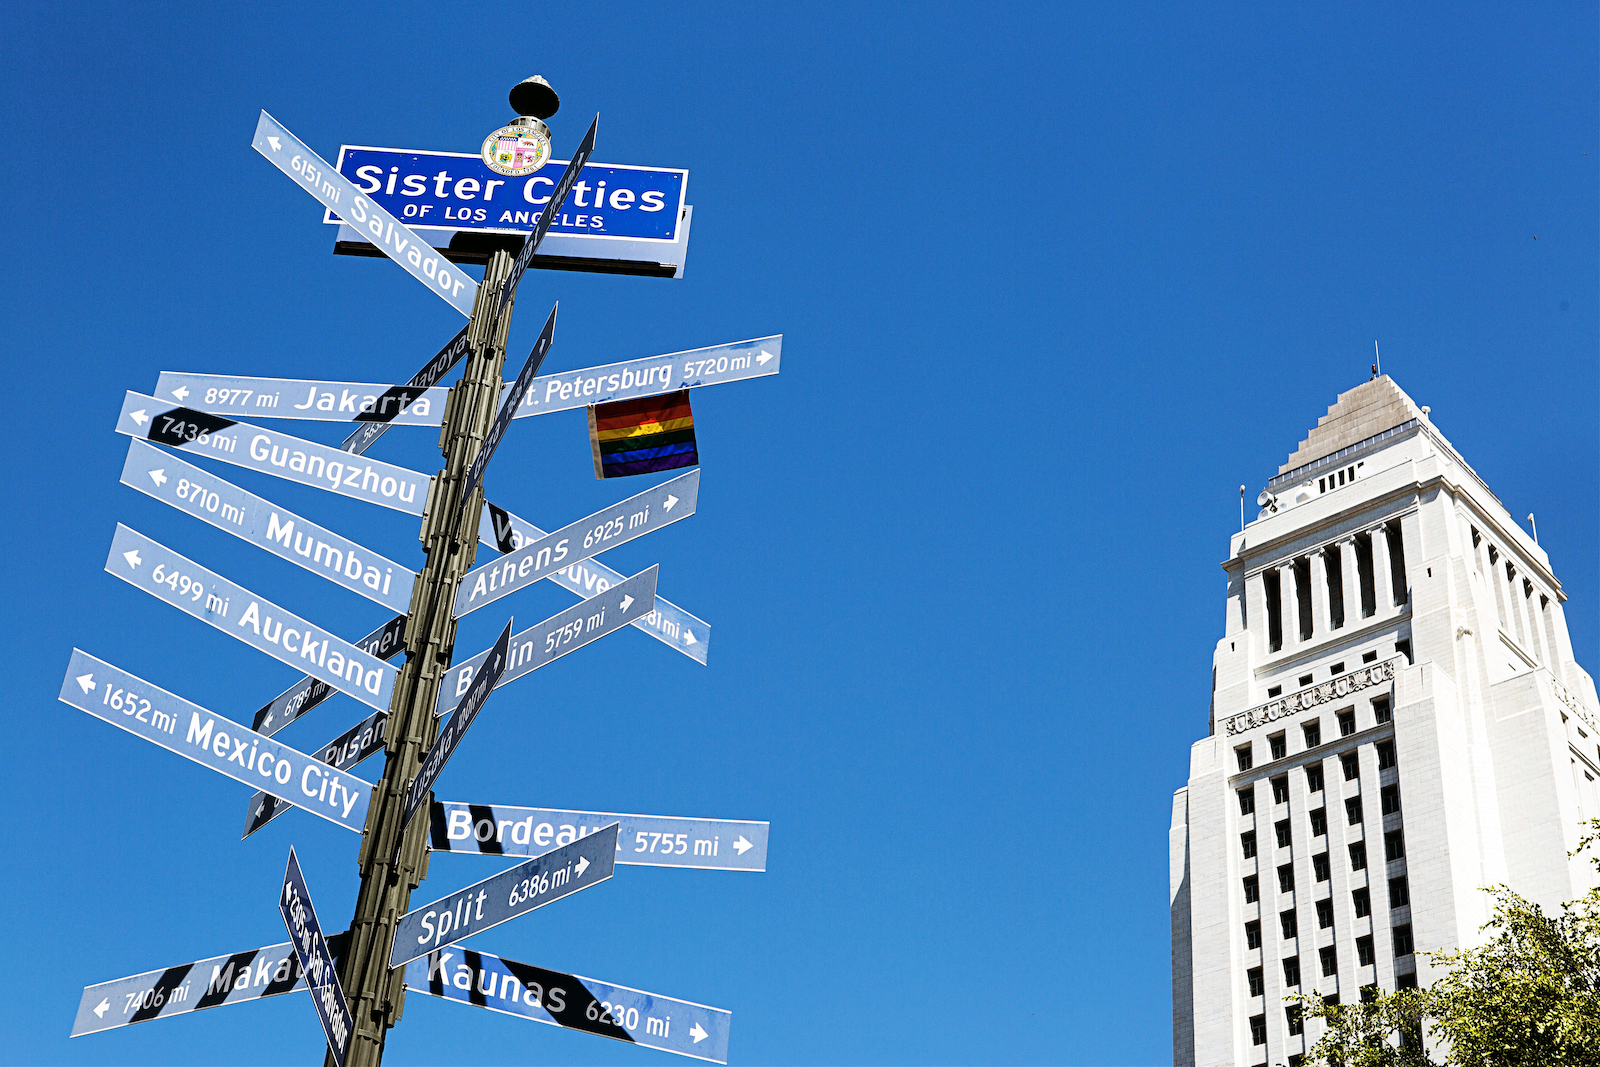 Los Angeles City Hall and sister cities